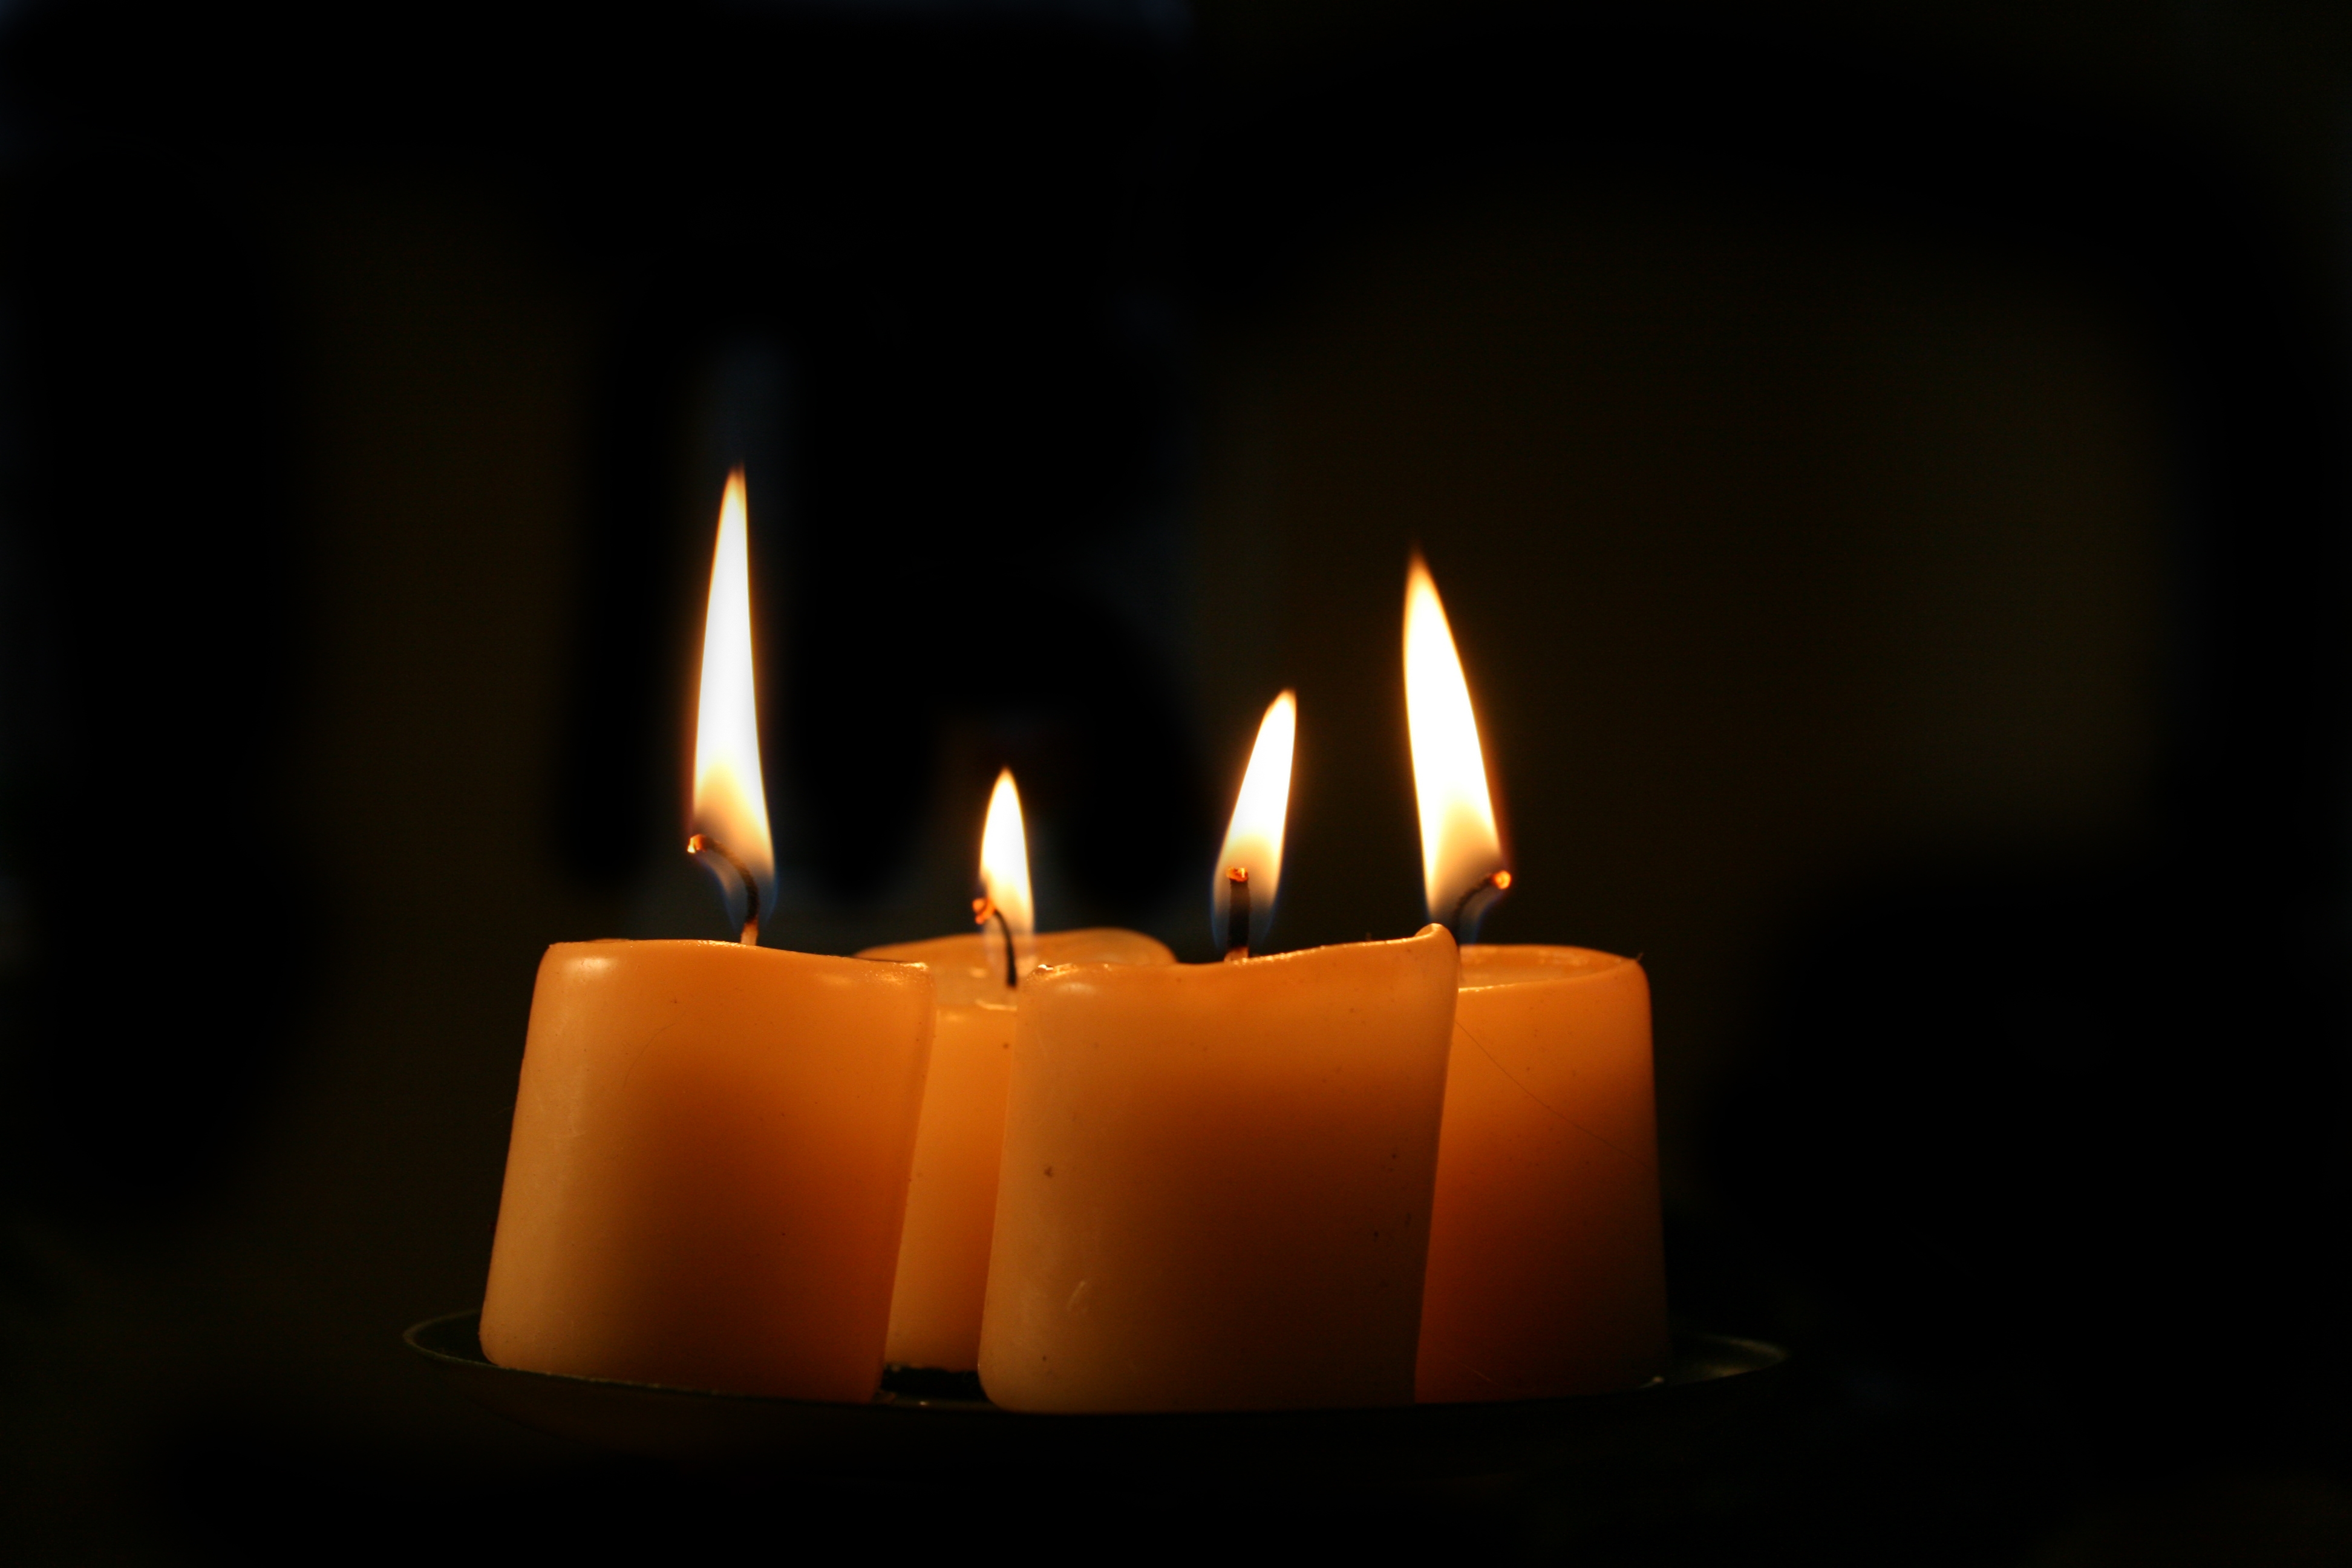 Cool Wallpapers fire, candles, macro, miscellanea, miscellaneous